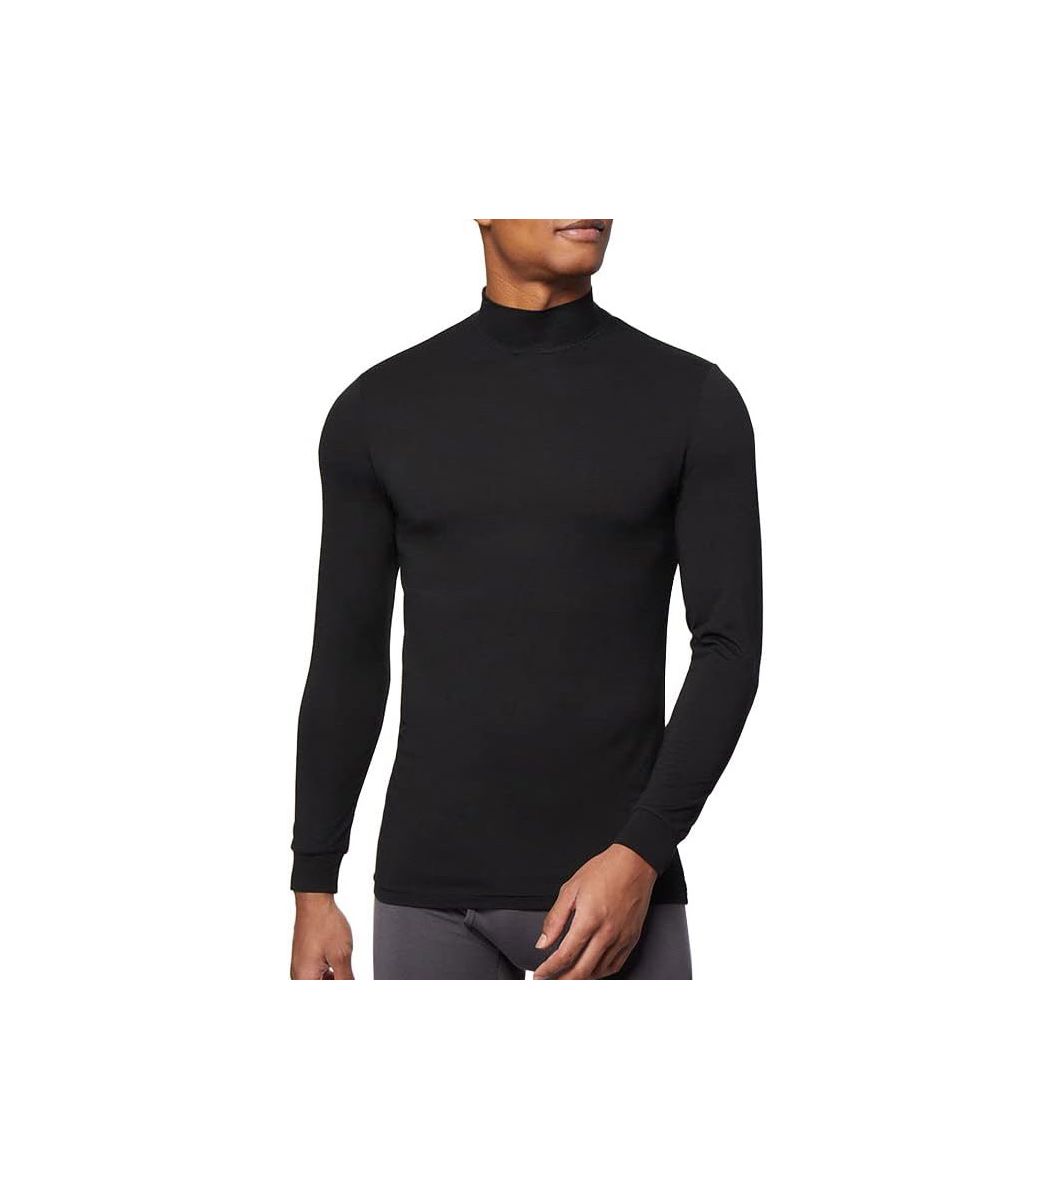  Men Long Sleeve T-Shirt Lord Lord Men Half turtleneck, Long Sleeve {PRODUCT_REFERENCE}-4